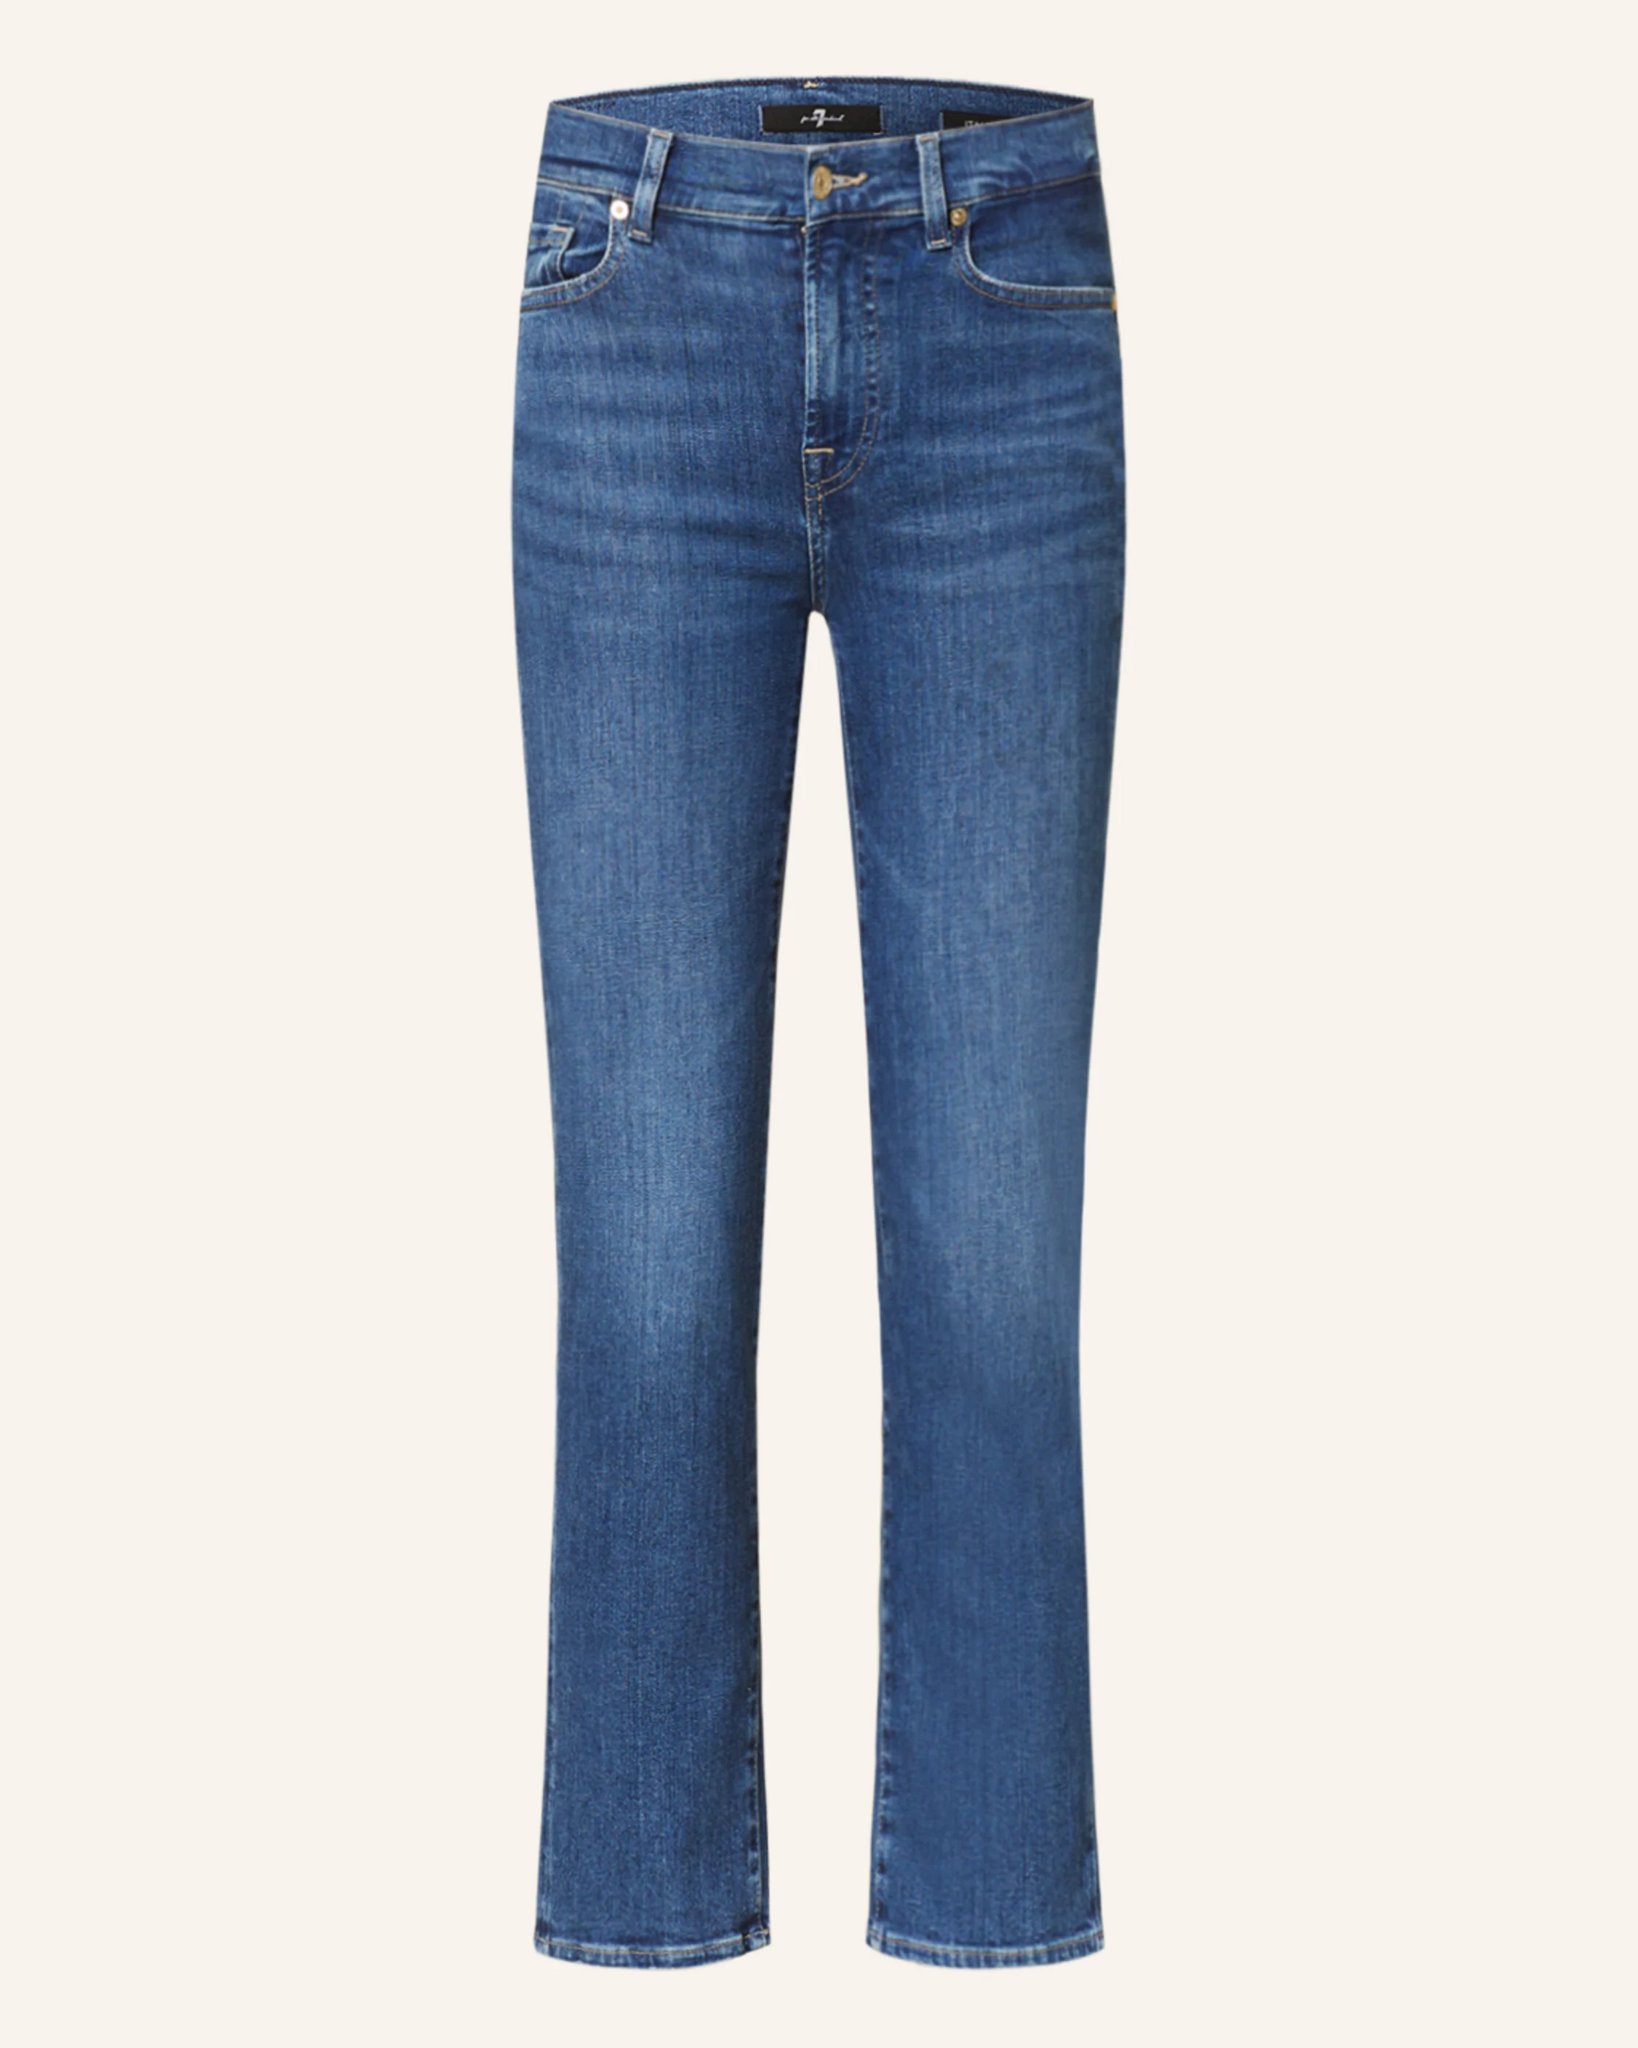 7 for all mankind - The Straight Crop